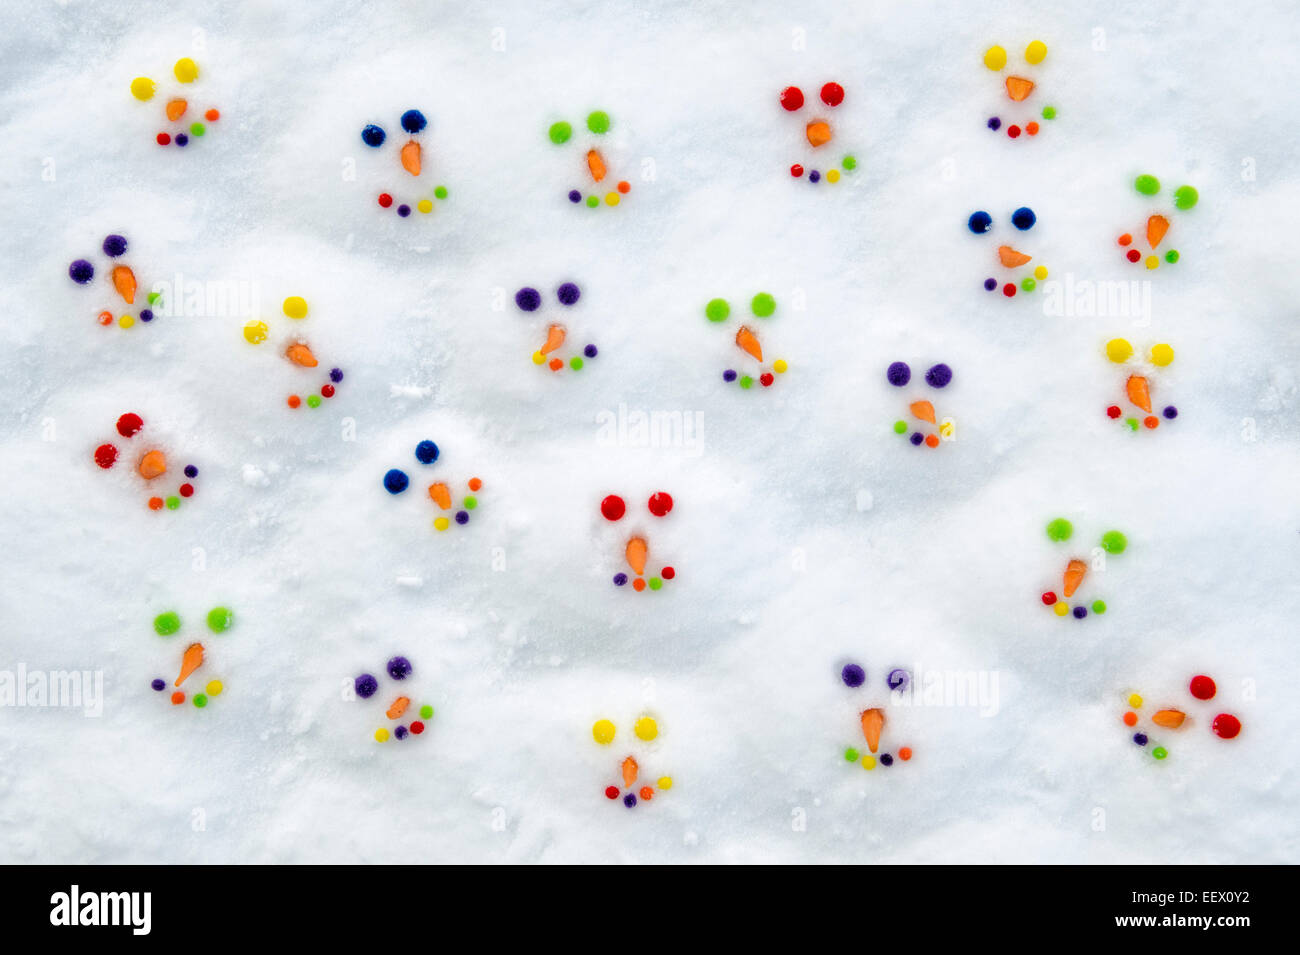 Smiling happy colourful snowman faces in the snow Stock Photo